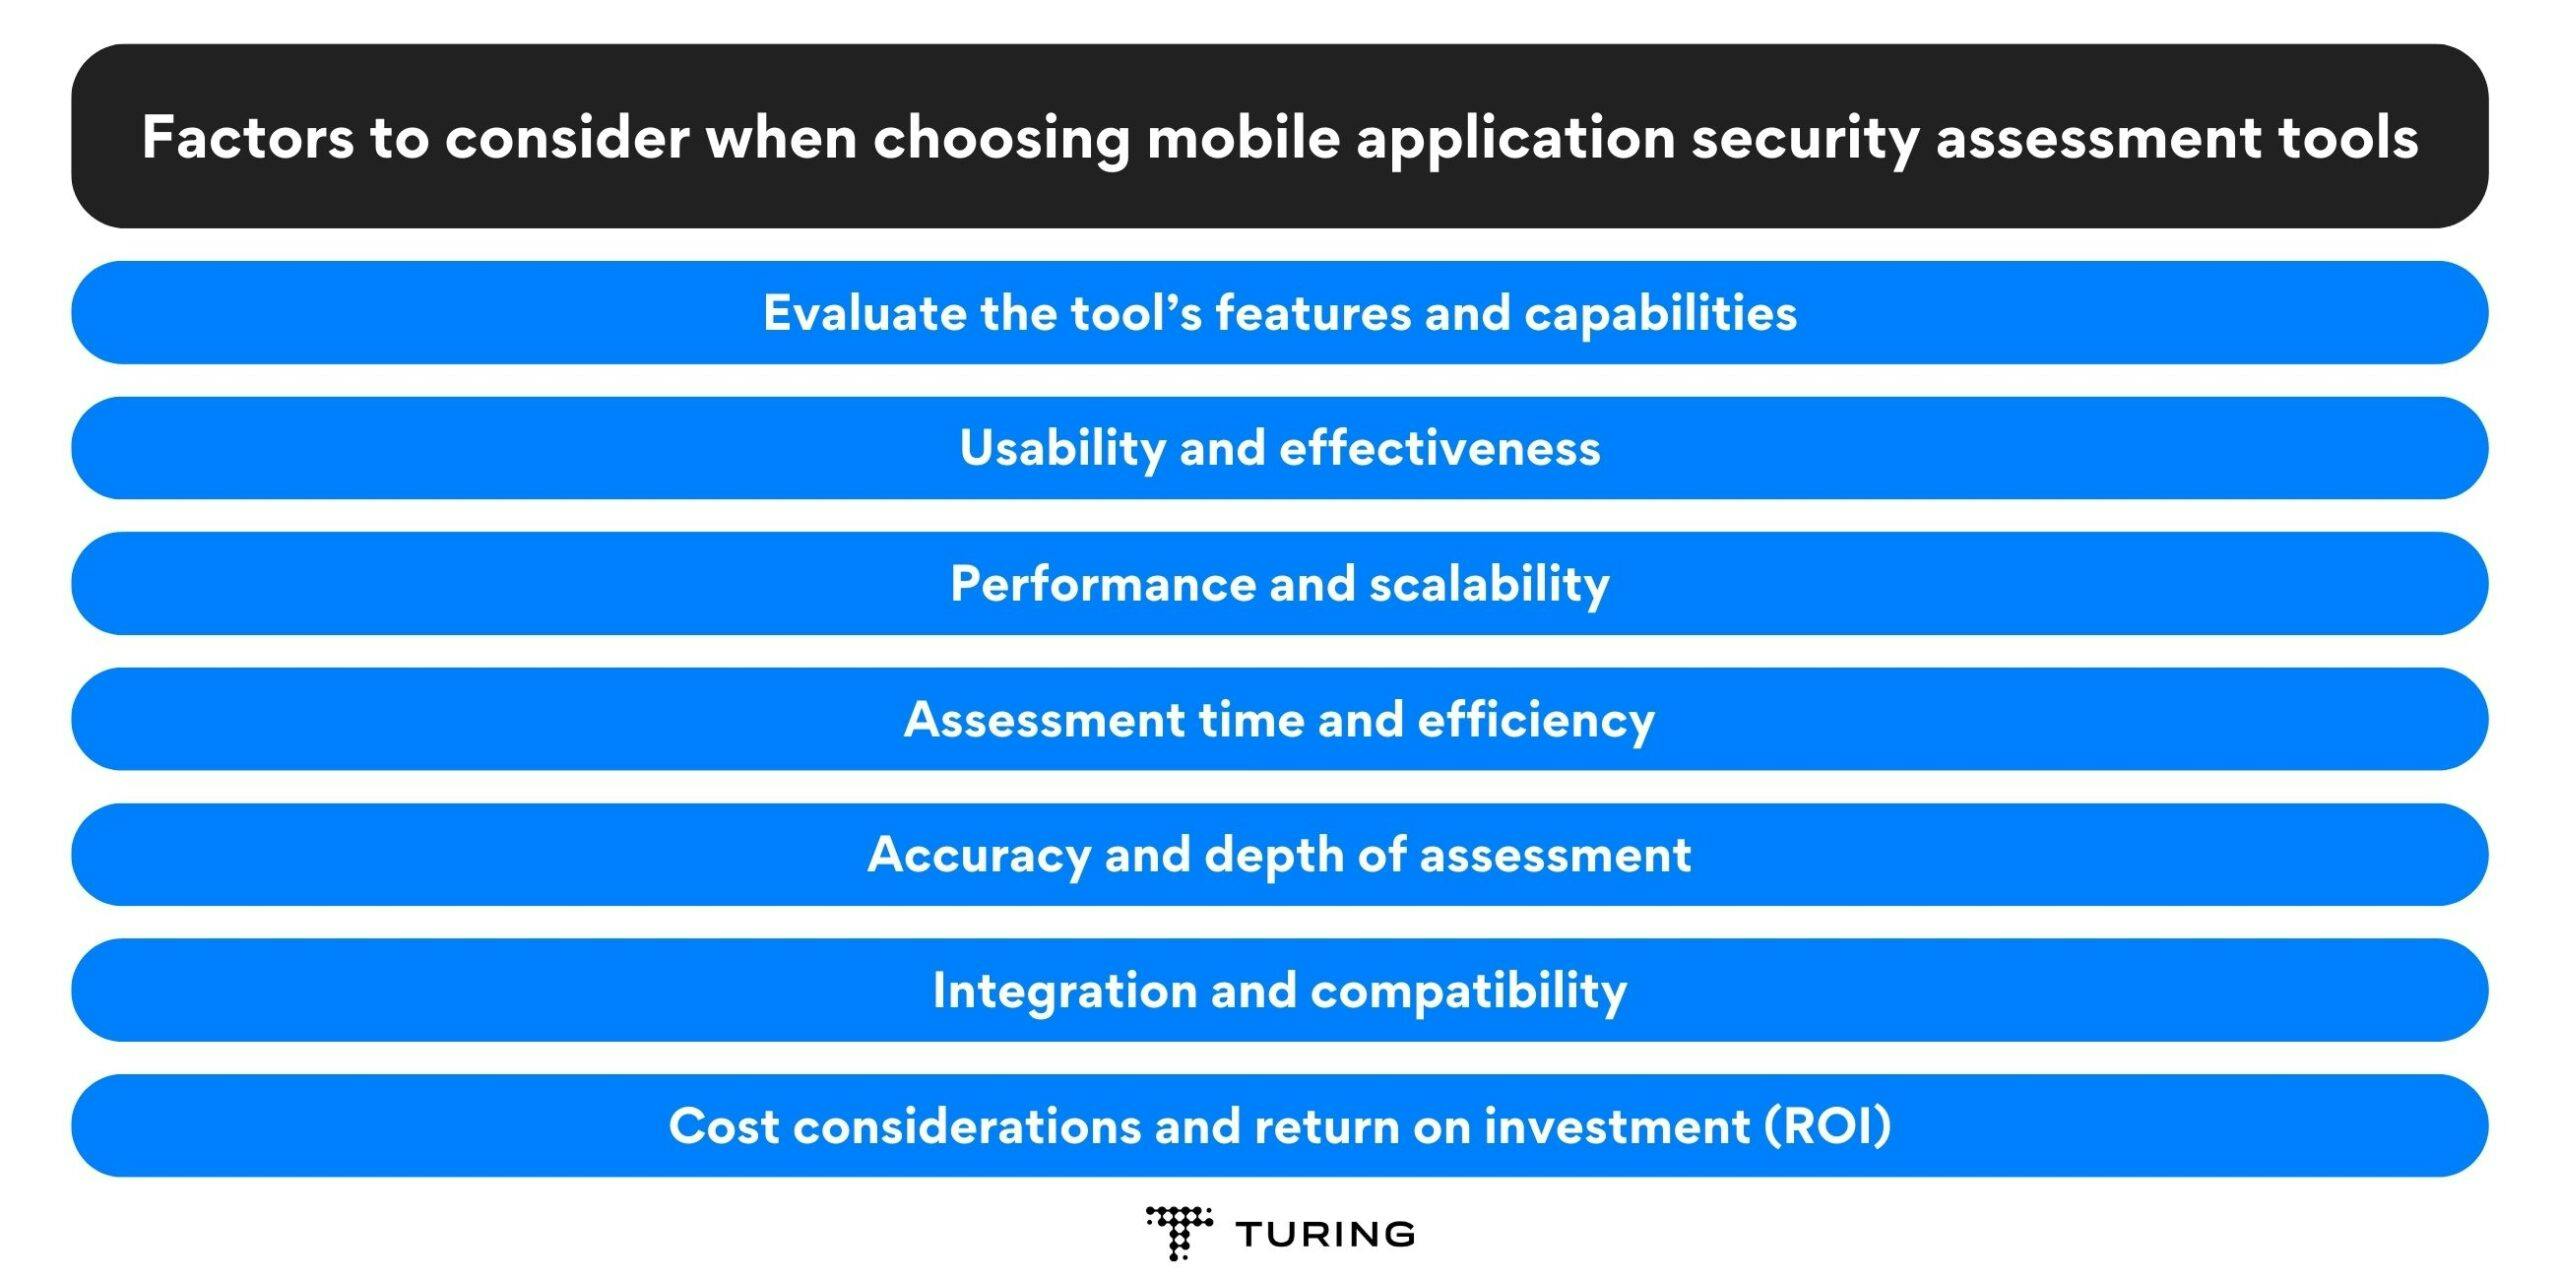 Factors to consider when choosing mobile application security assessment tools